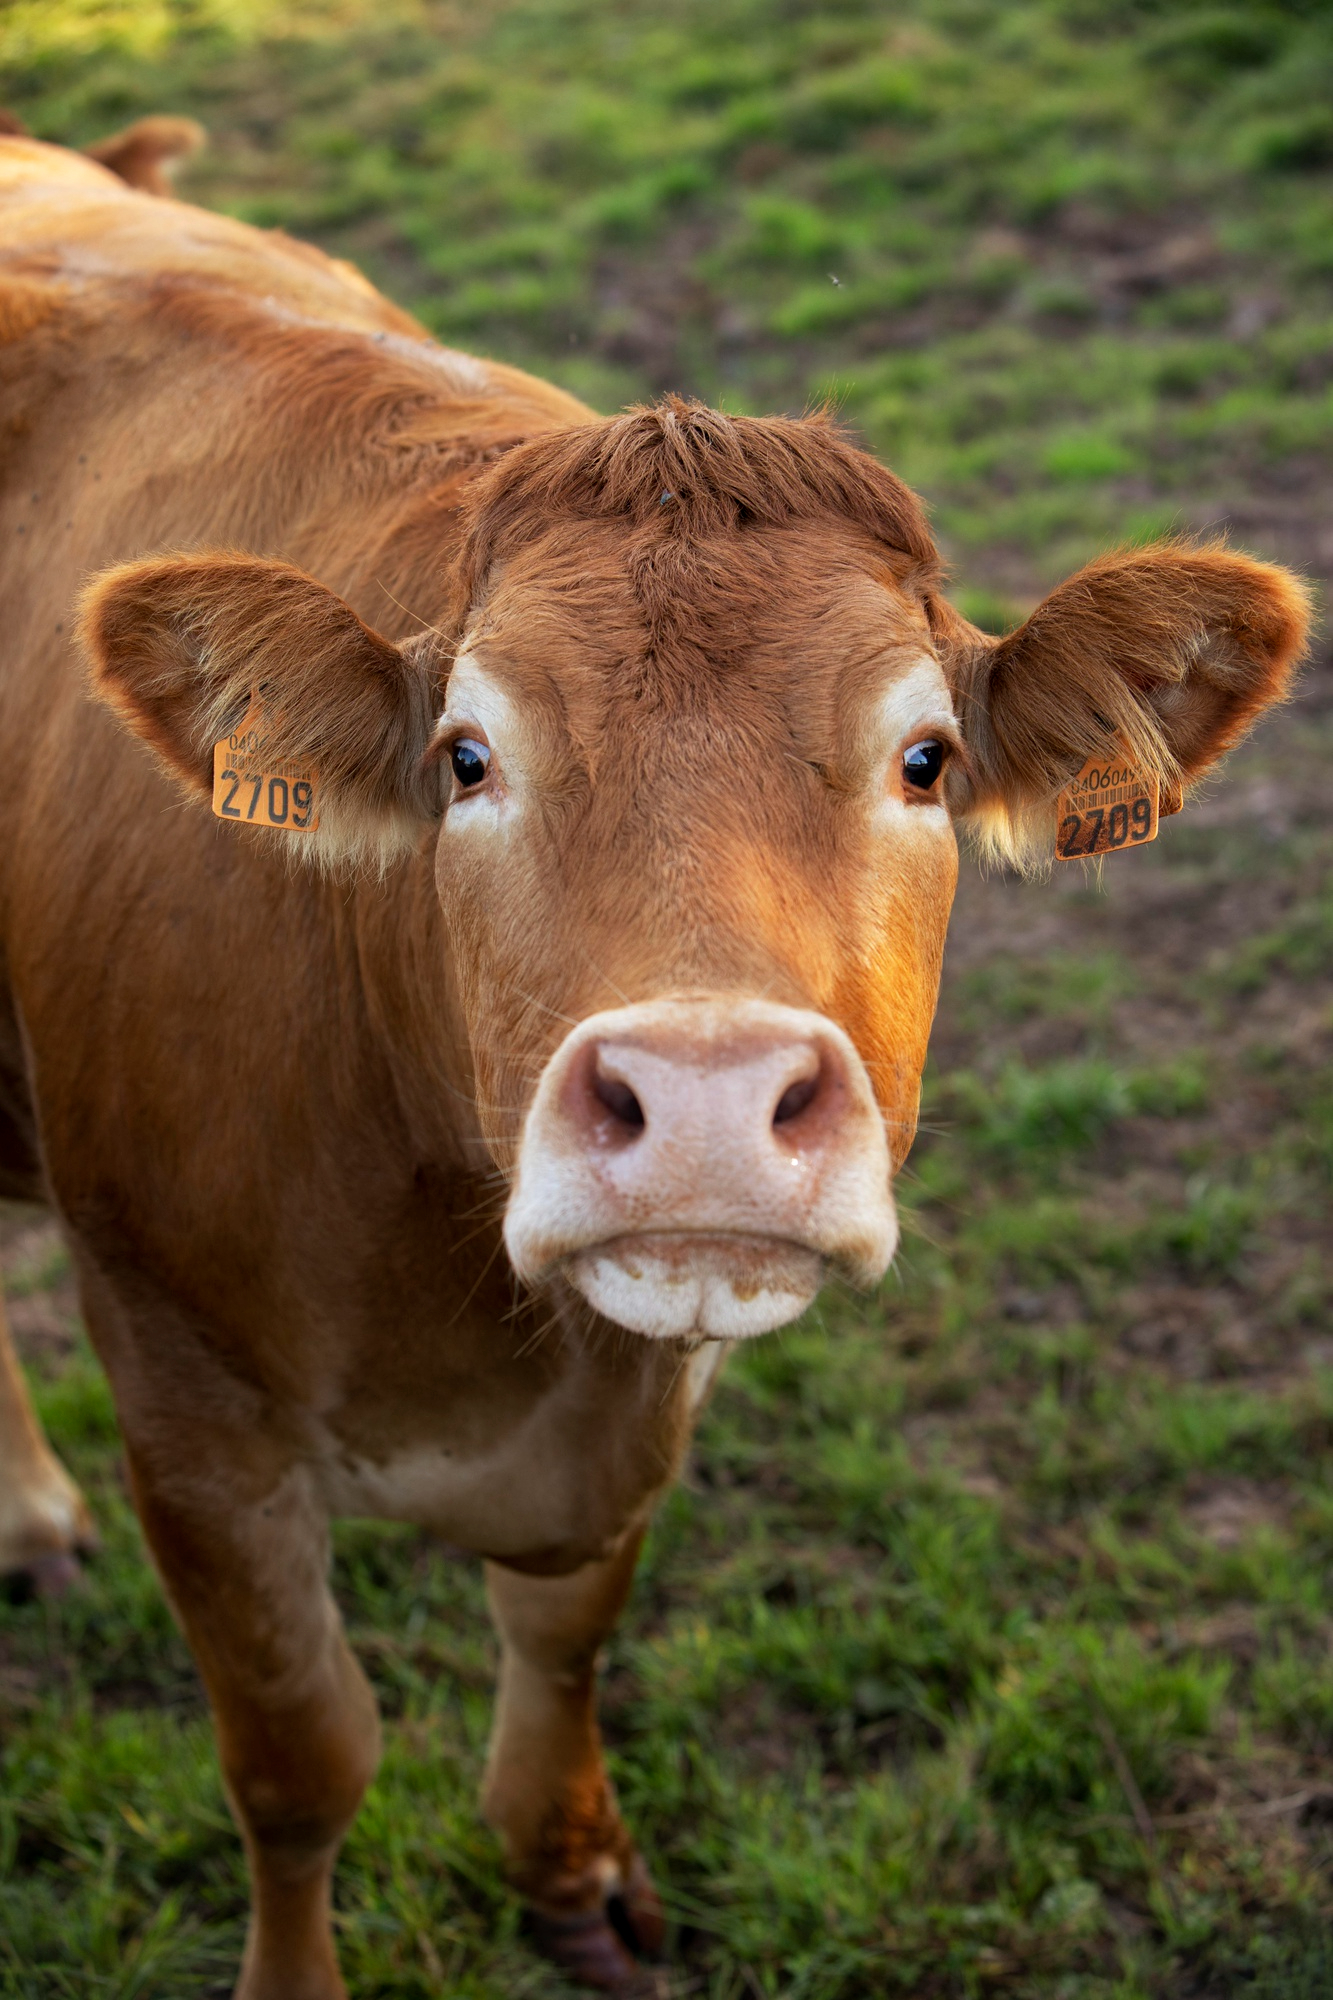 Photo of a Cow